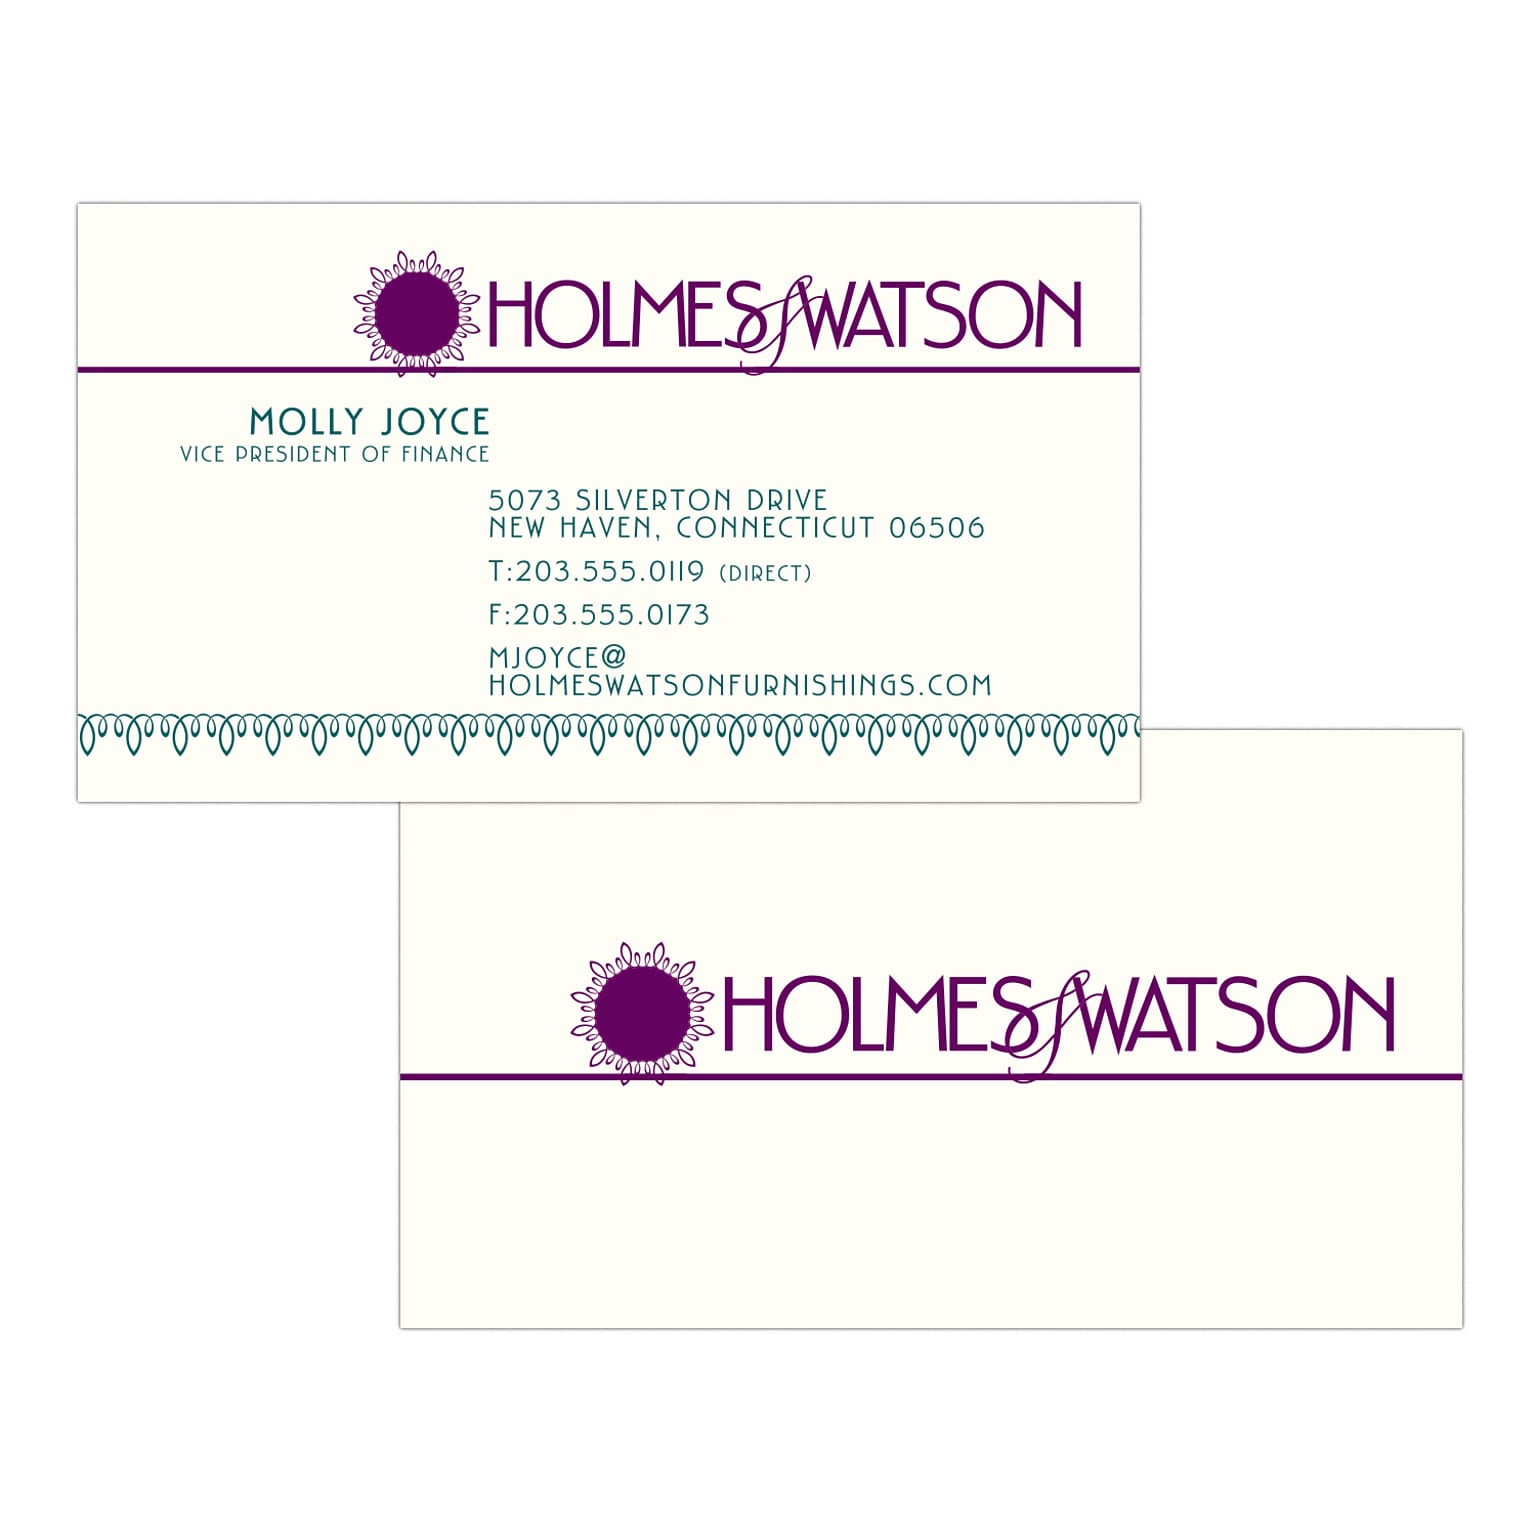 Custom 1-2 Color Business Cards, CLASSIC CREST® Natural White 80#, Flat Print, 2 Custom Inks, 2-Sided, 250/PK